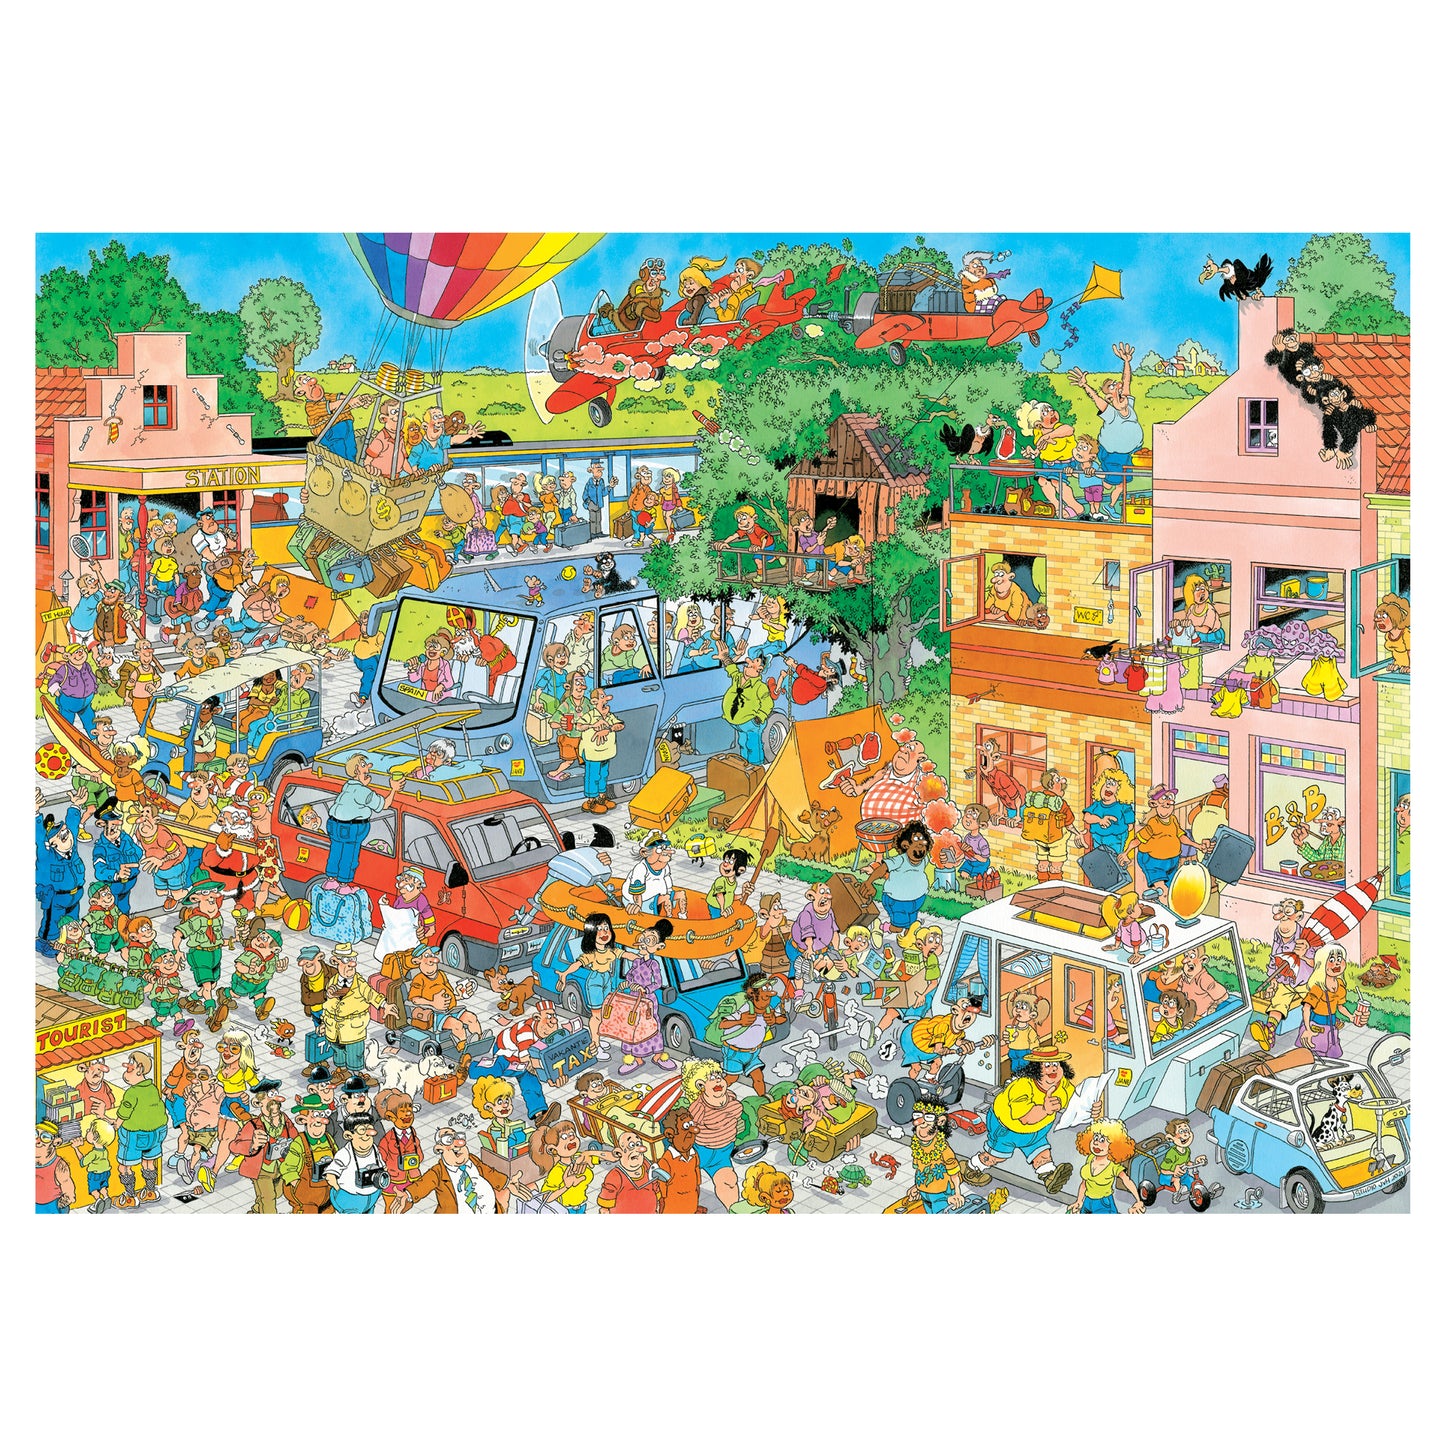 JvH The Music Shop & Holiday Jitters (2x1000 pieces) - product image - Jumboplay.com